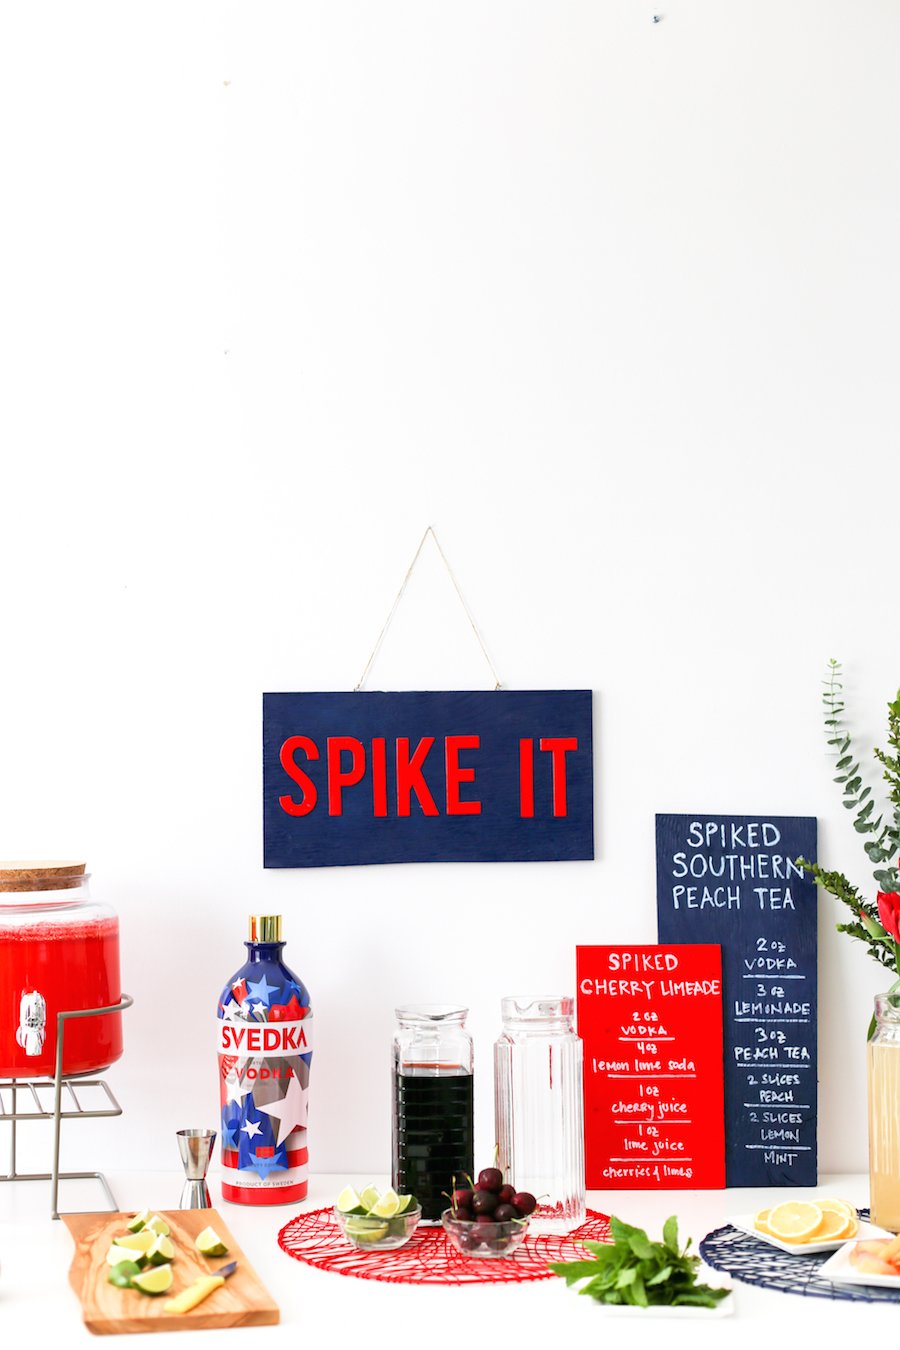 Throw a party with spiked cocktails for this summer's holiday! Cocktails can be a Spiked Cherry Limeade or Spiked Southern Peach Tea! // saltycanary.com